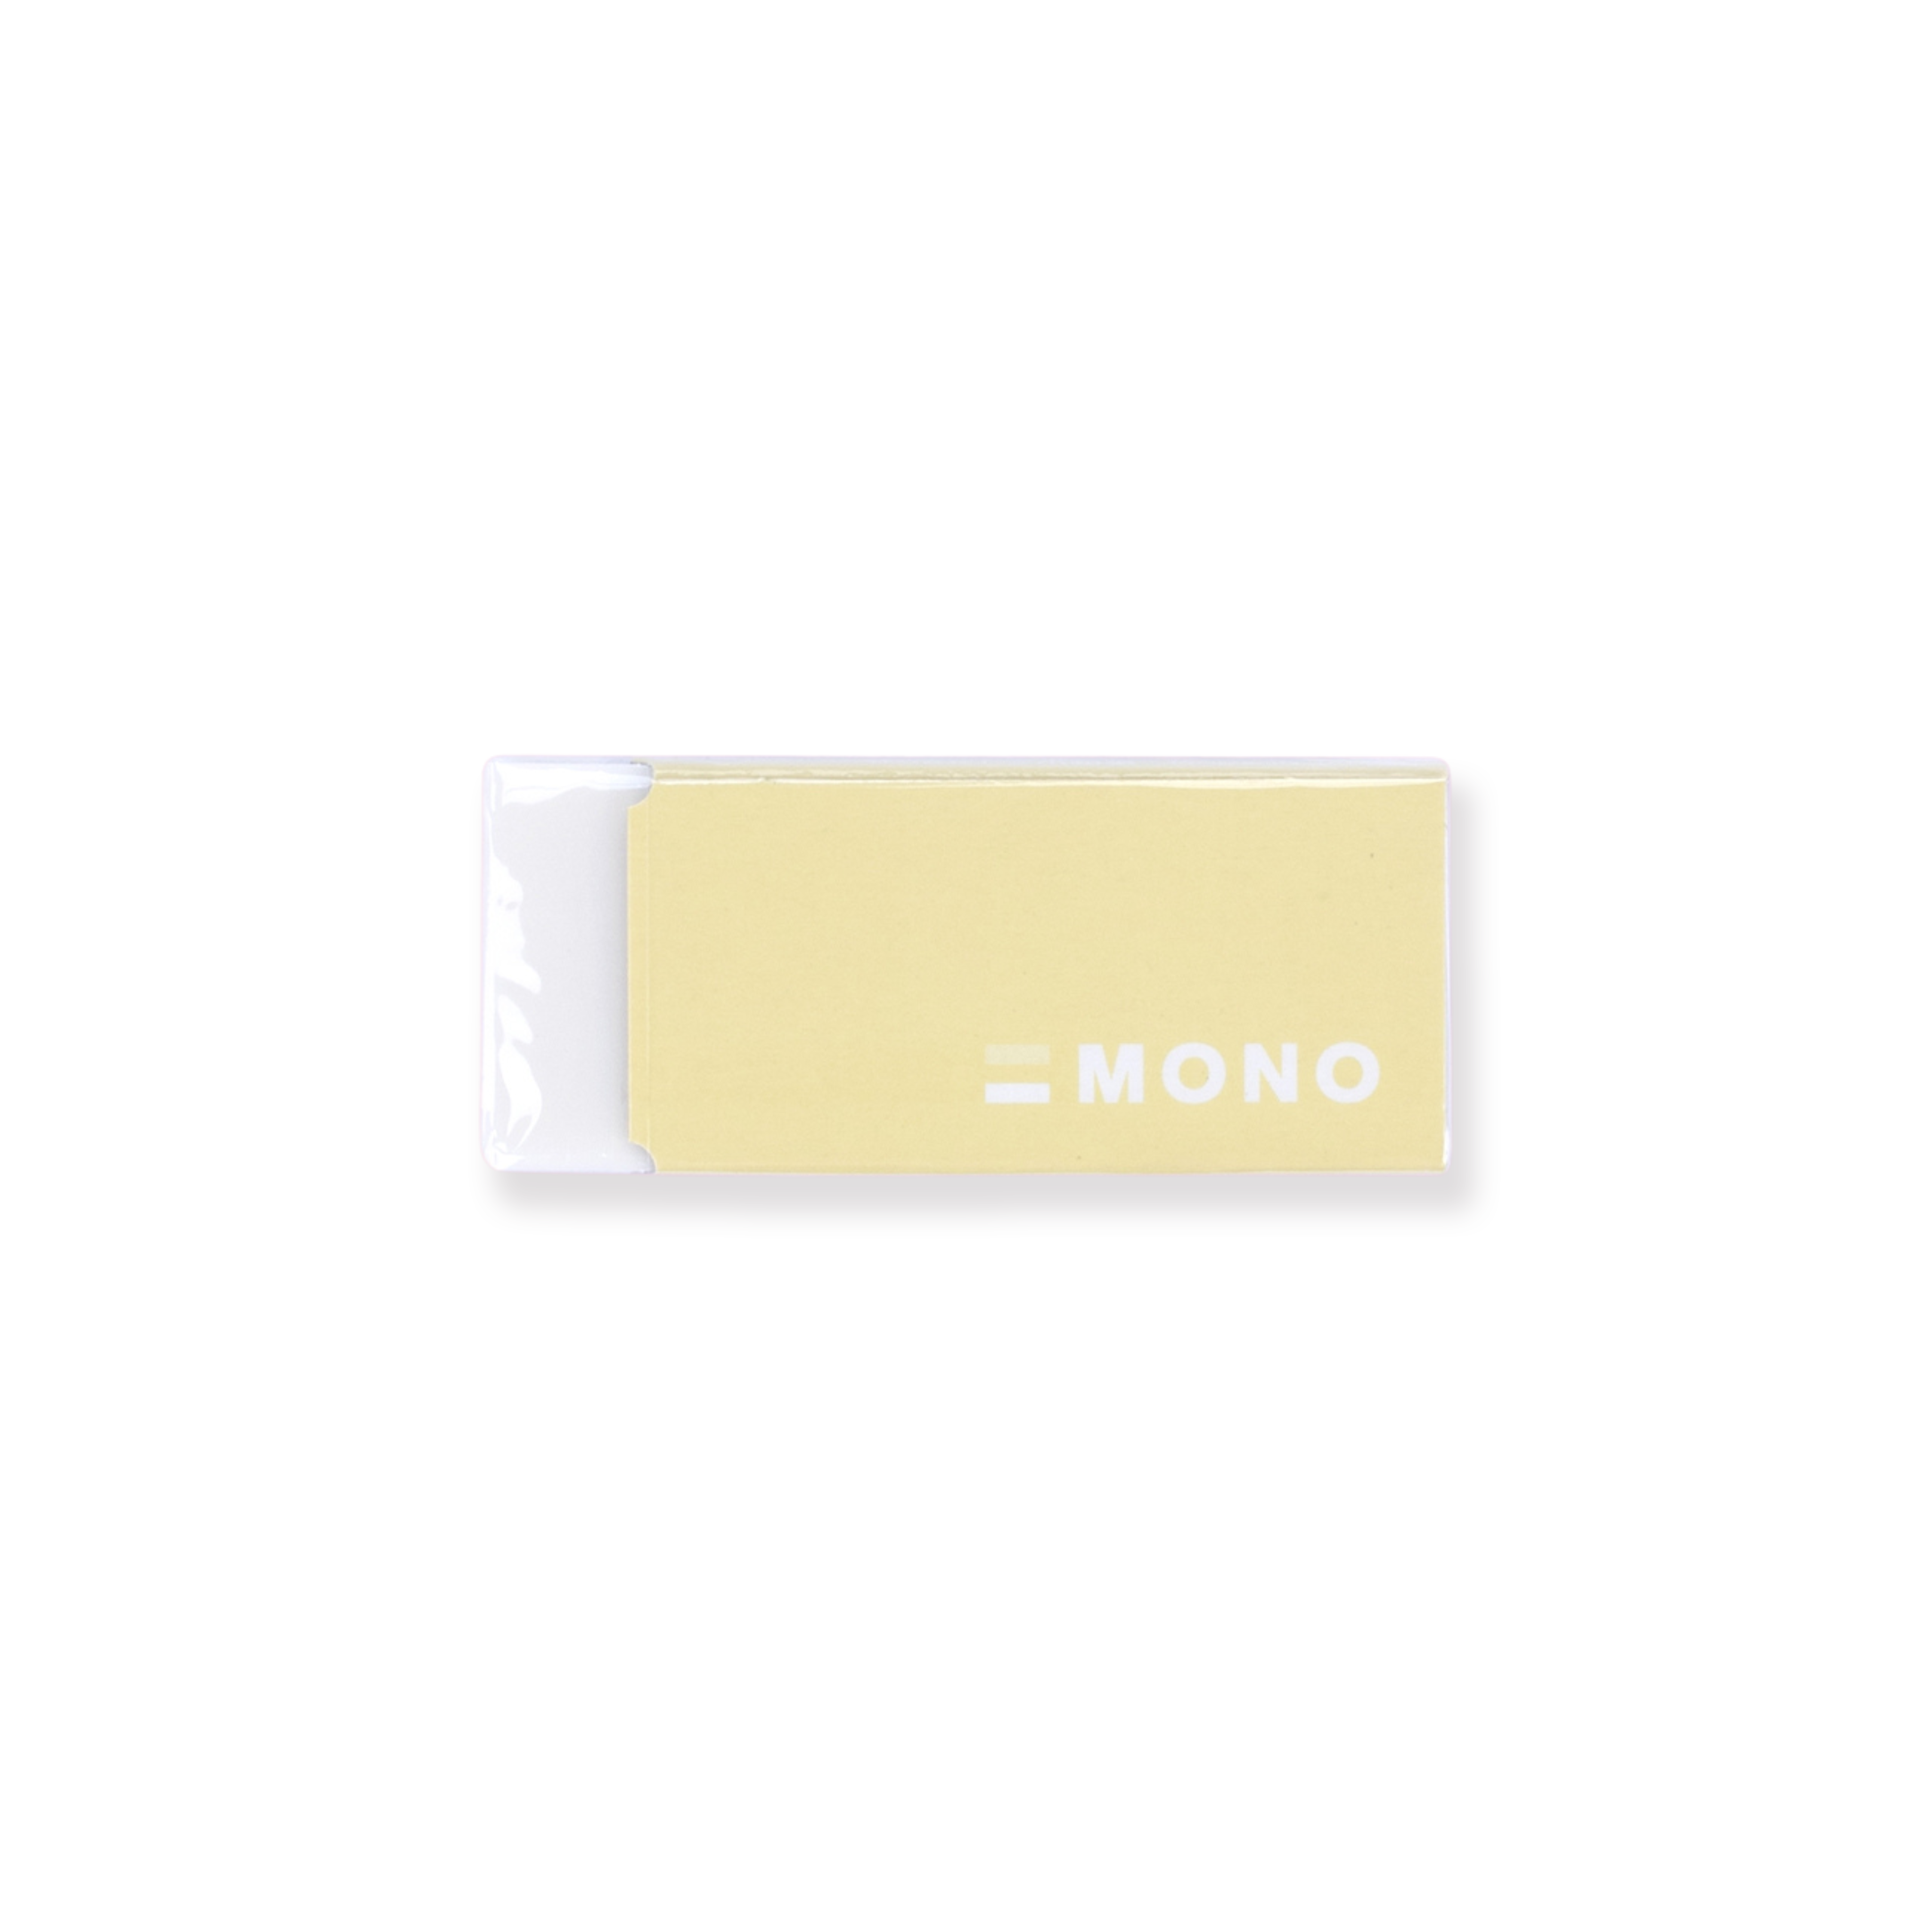 Tombow MONO Graph Eraser - Faded Color 2022 - Honiggelb